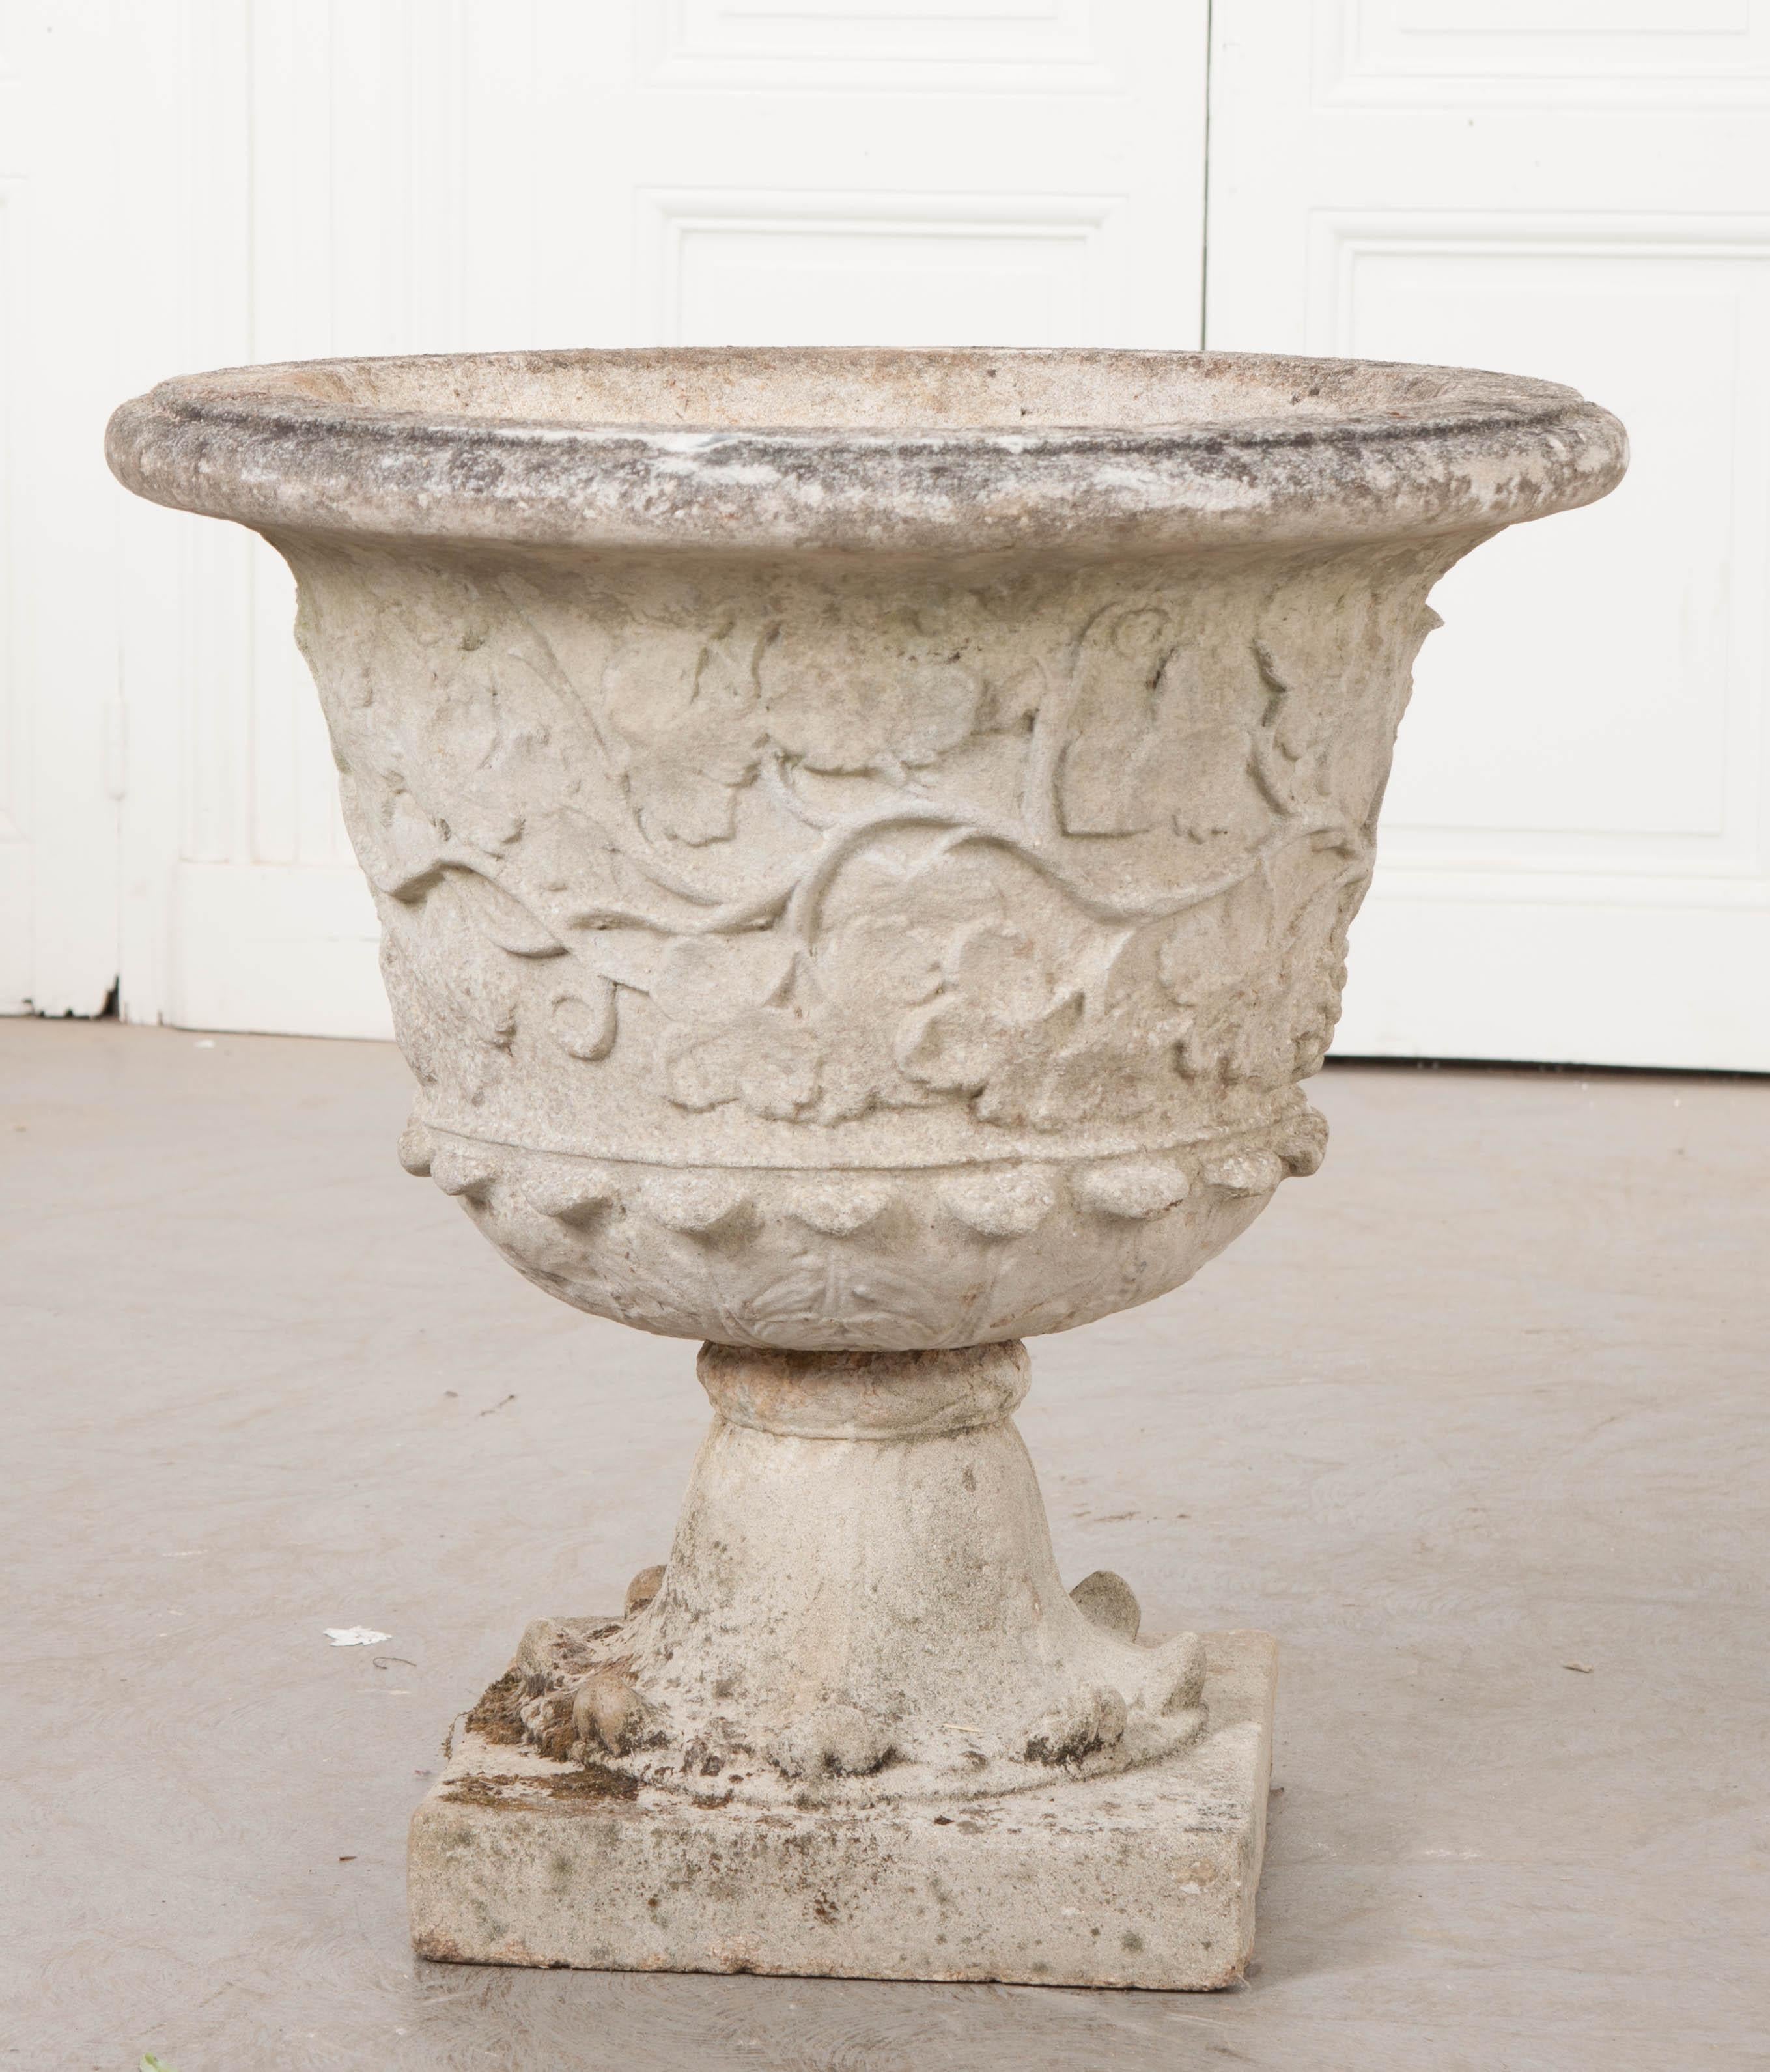 This wonderful pair of cast-stone garden urns, circa 1870s, was found in England and feature a lovely scrolling vine motif. The urns and bases are separate pieces and each is drilled for proper water drainage. Measures: Urns 15-1/2? H x 18-1/2?